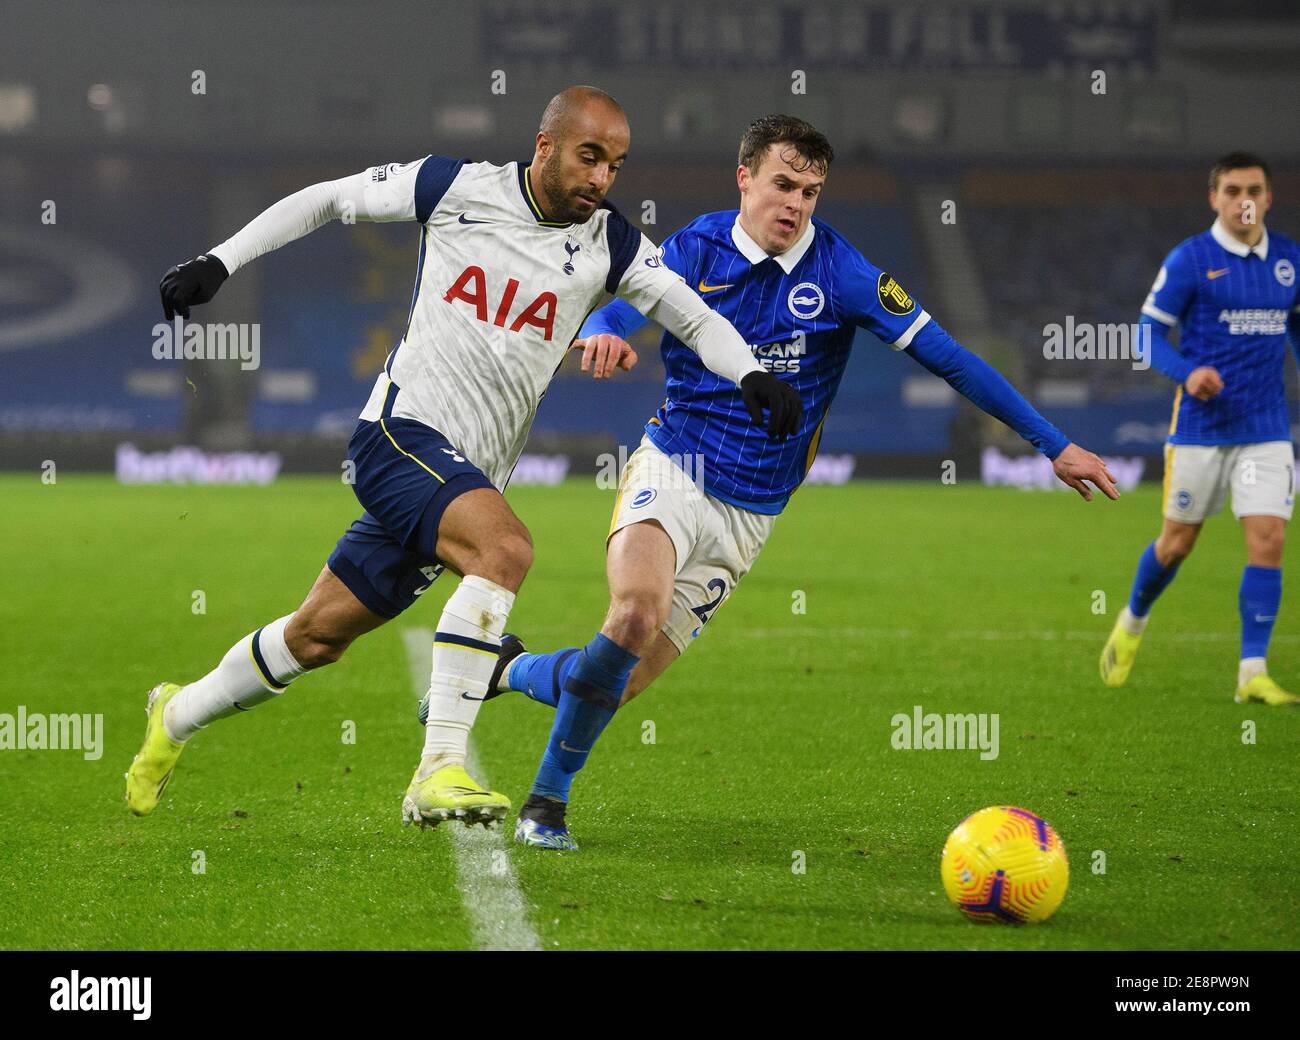 Amex Stadium, Brighton, 31st Jan 2021  Tottenham's Lucas Moura during their Premier League match against Brighton & Hove Albion Picture Credit : © Mark Pain / Alamy Live News Stock Photo